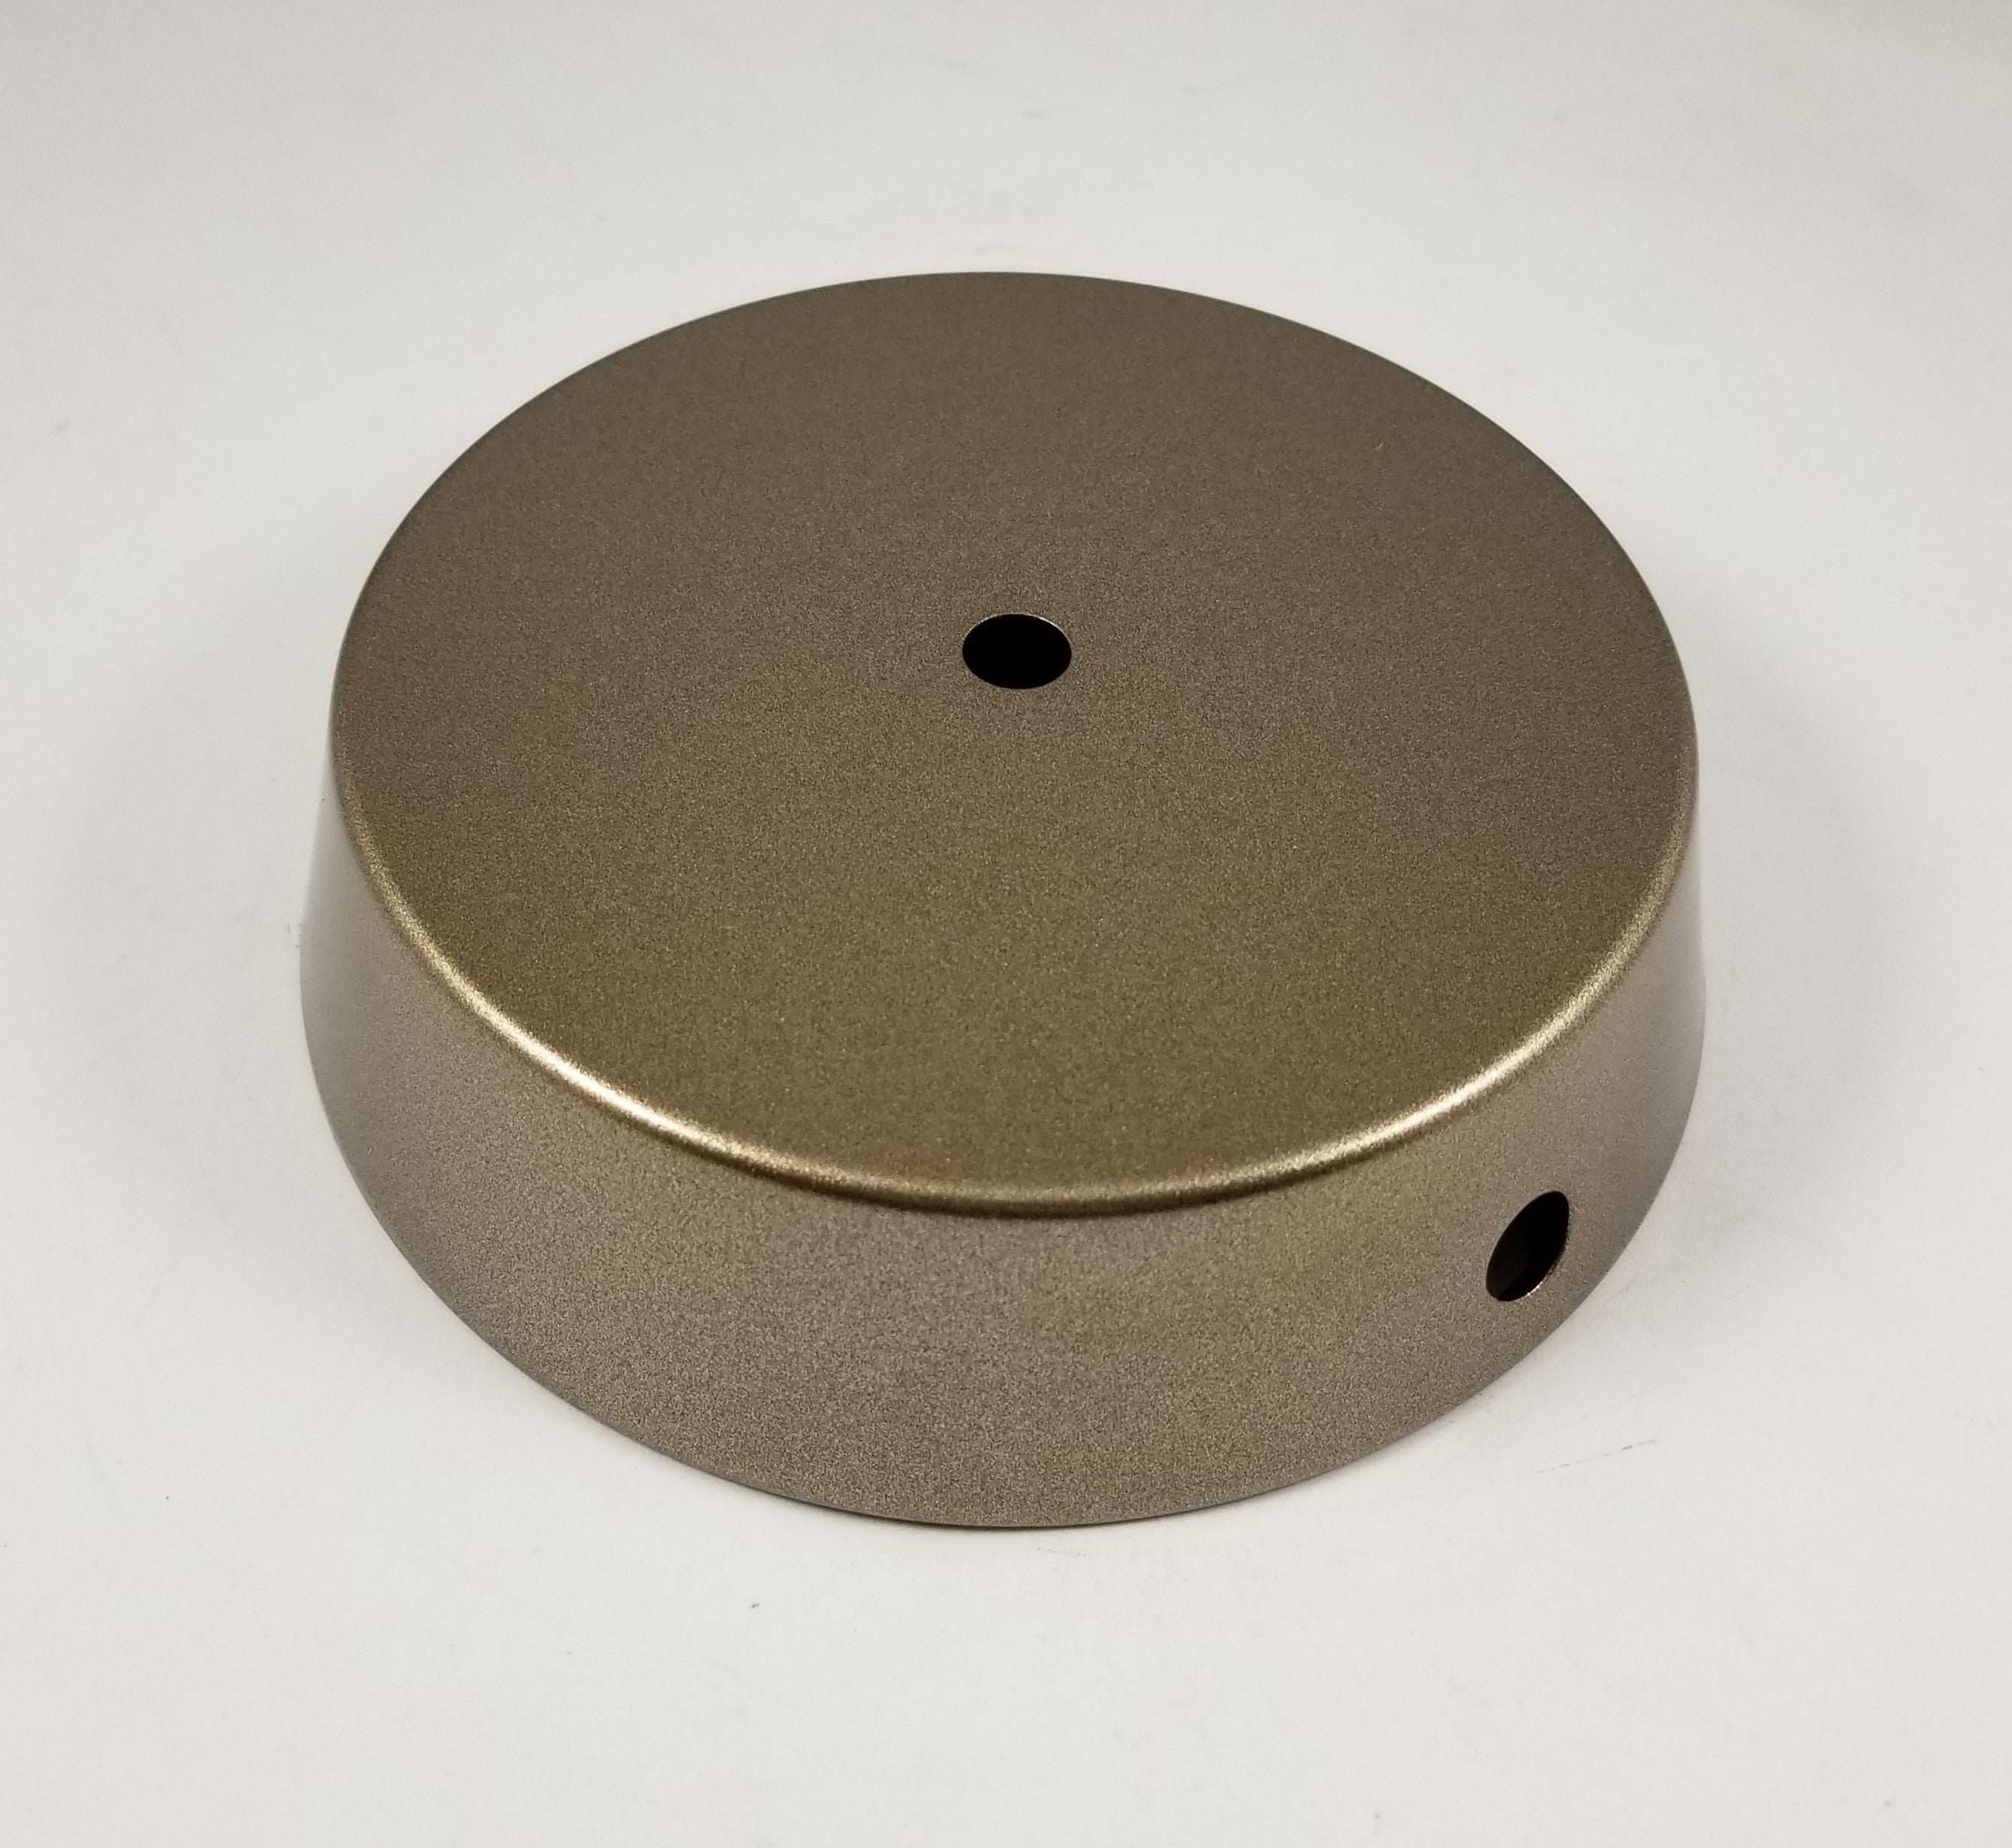 5" Steel Base - Antique Brass painted finish